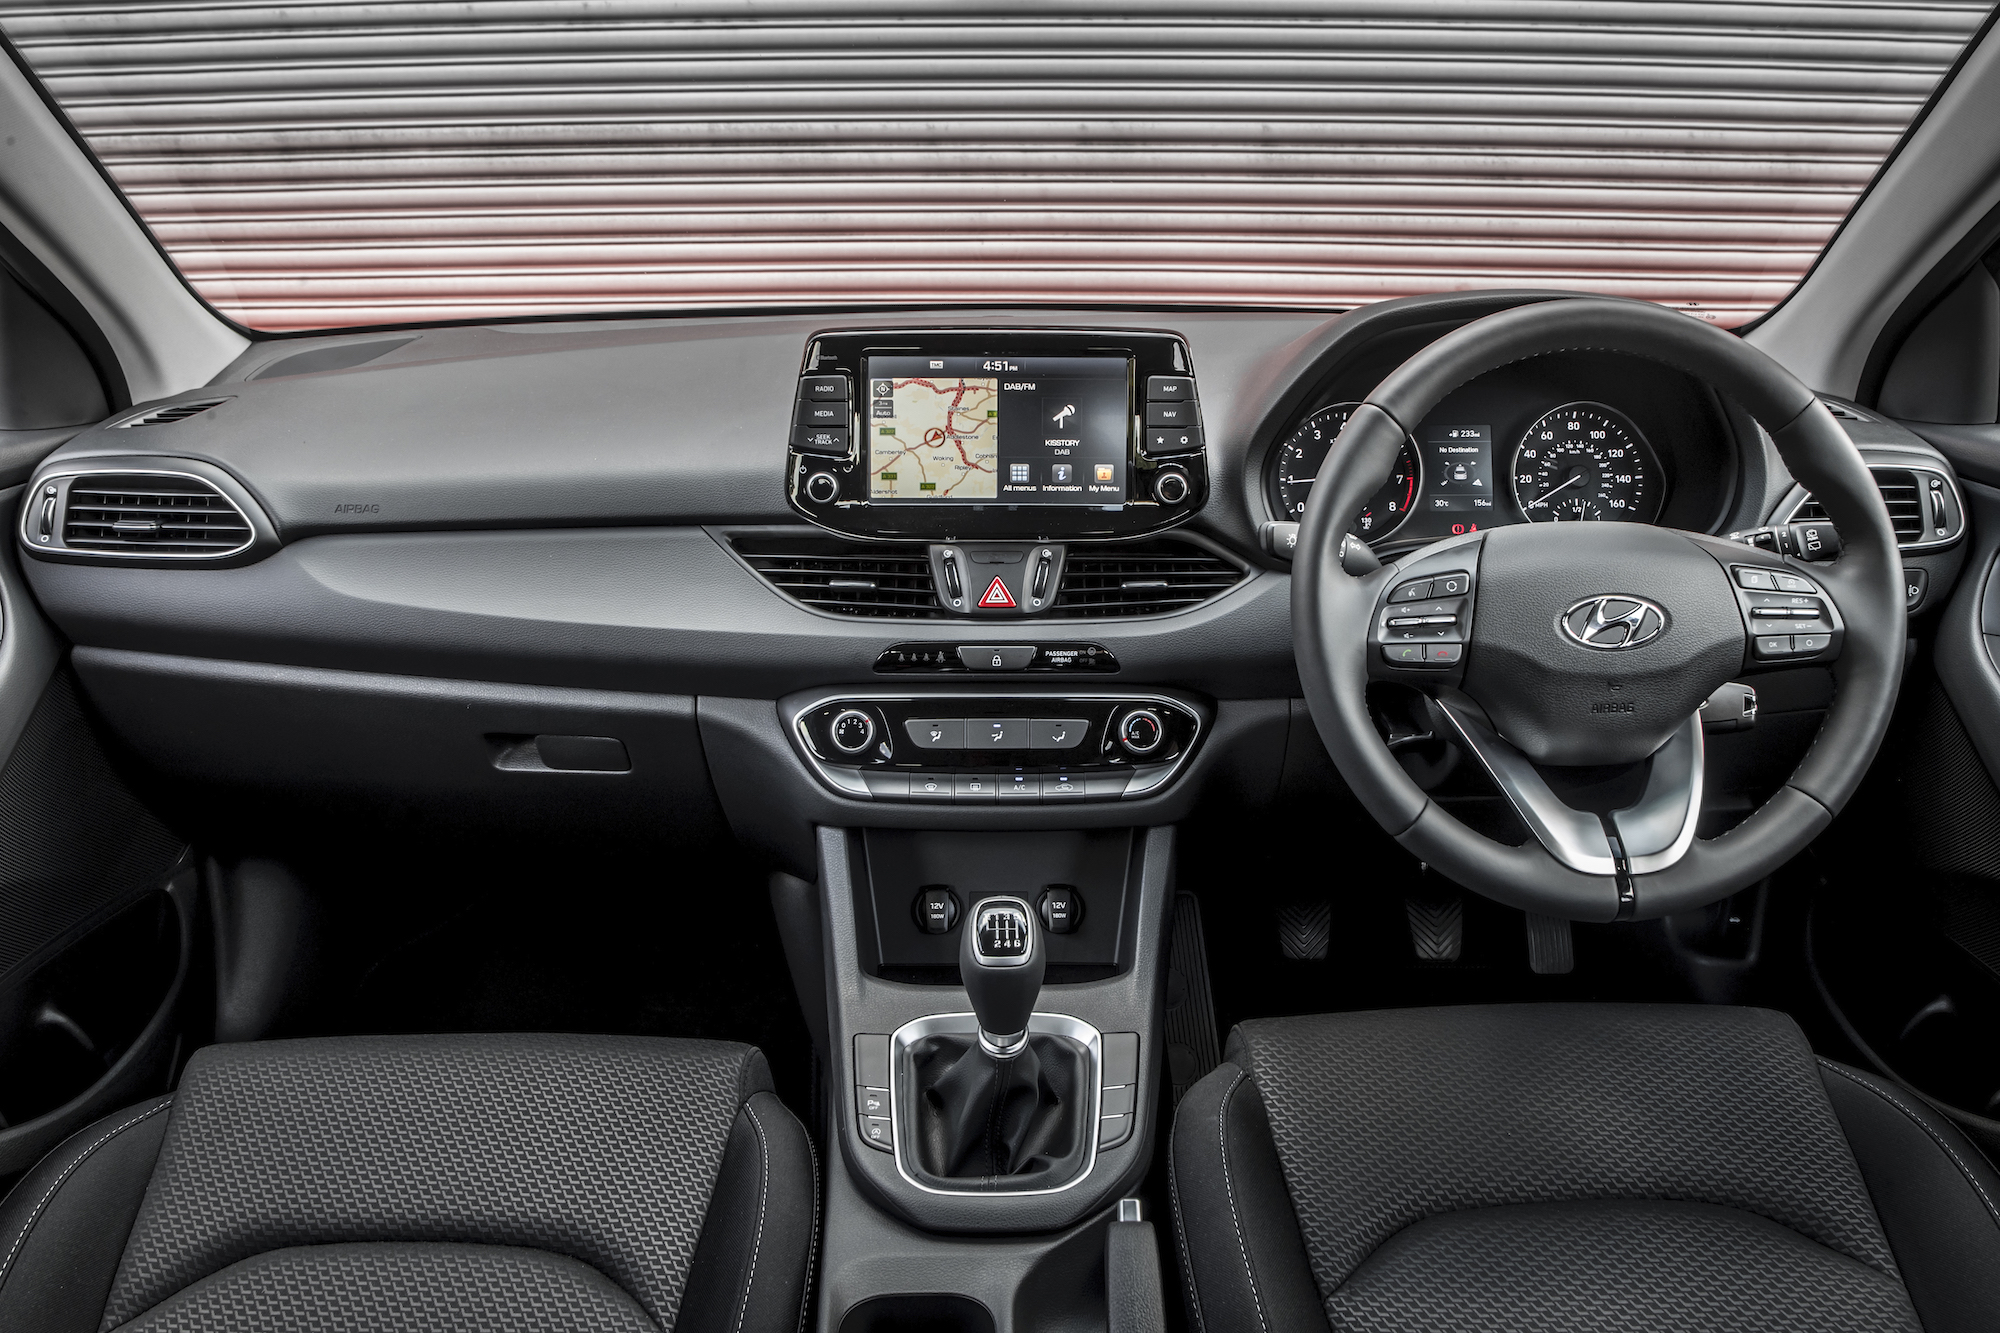 The i30's cabin is solidly made with several soft-touch materials